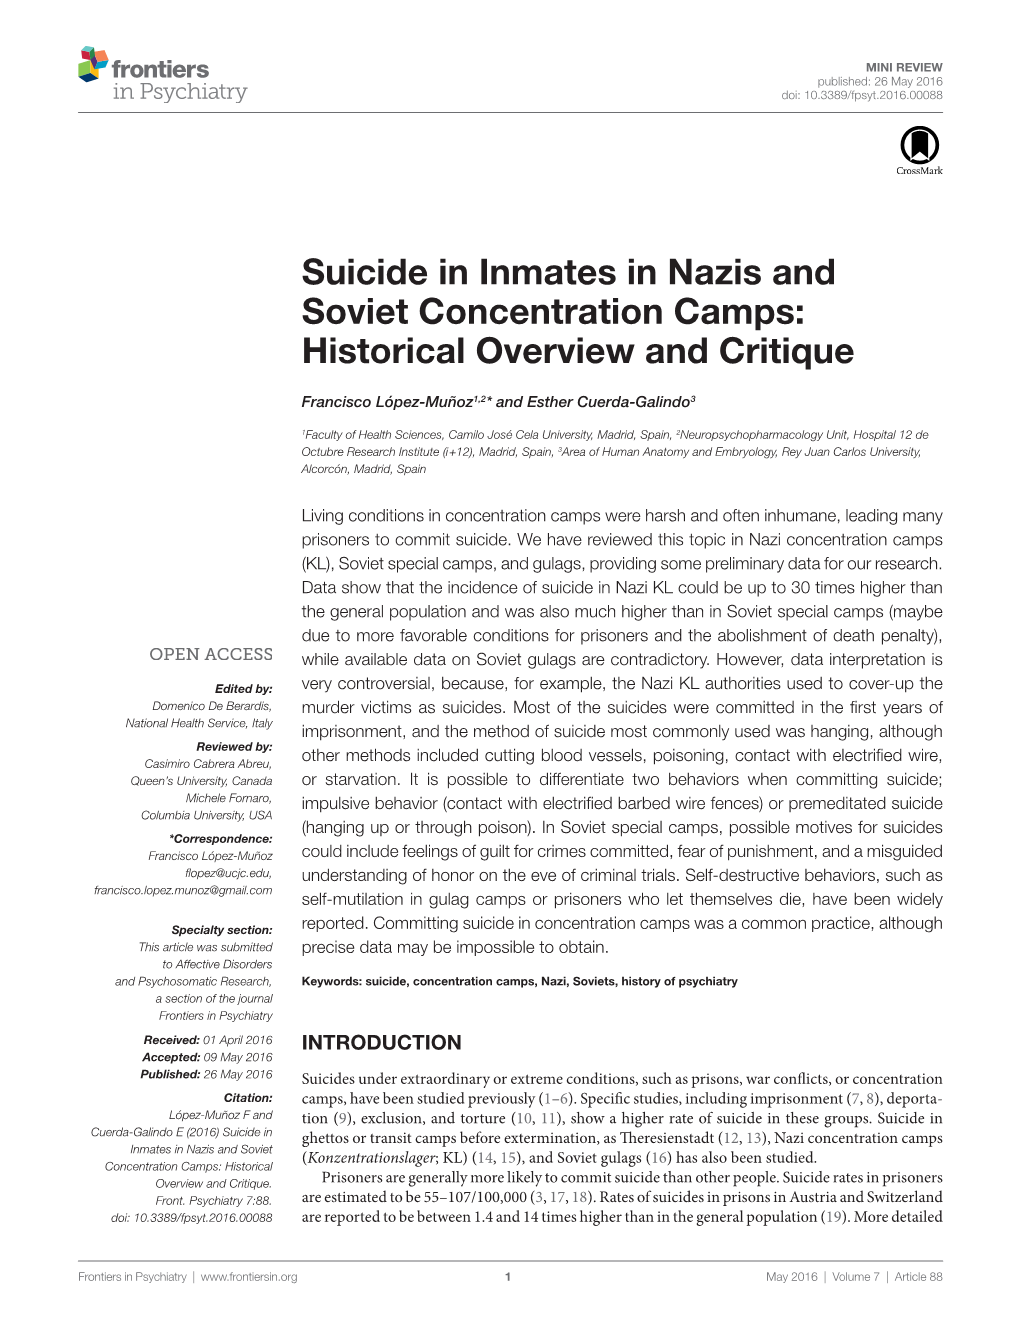 Suicide in Inmates in Nazis and Soviet Concentration Camps: Historical Overview and Critique